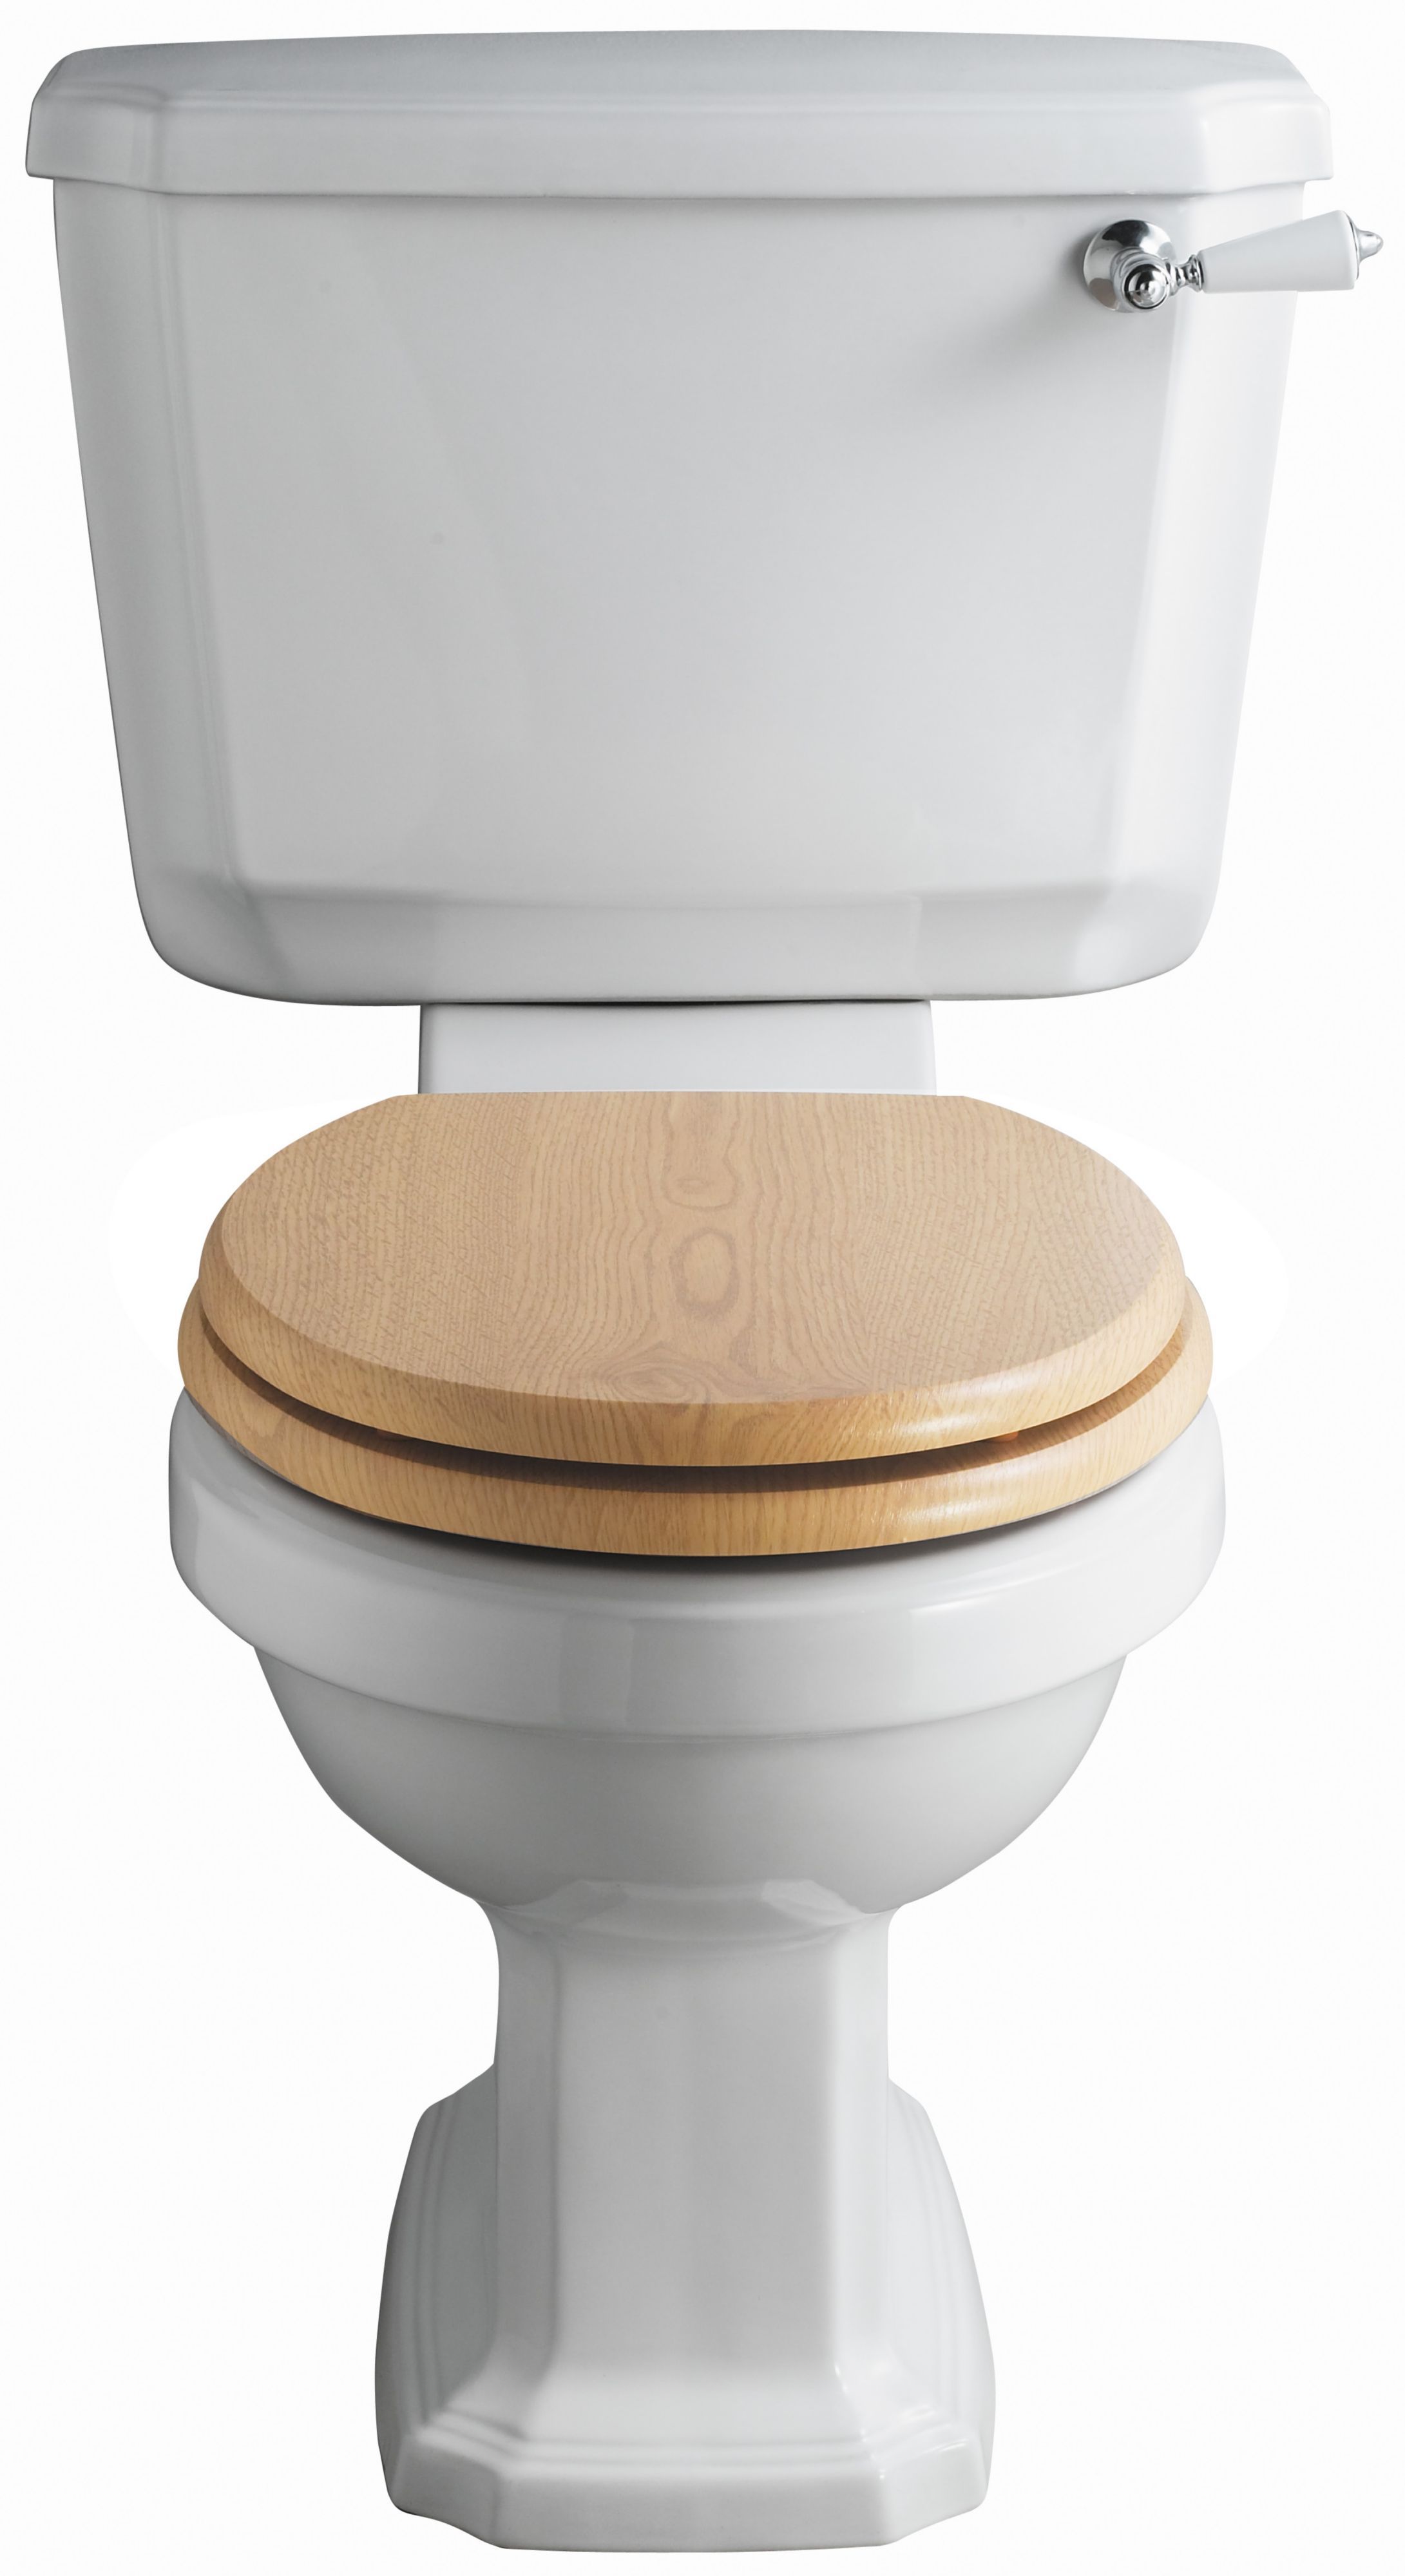 Cooke & Lewis Octavia Modern Close-Coupled Toilet Seat | Departments